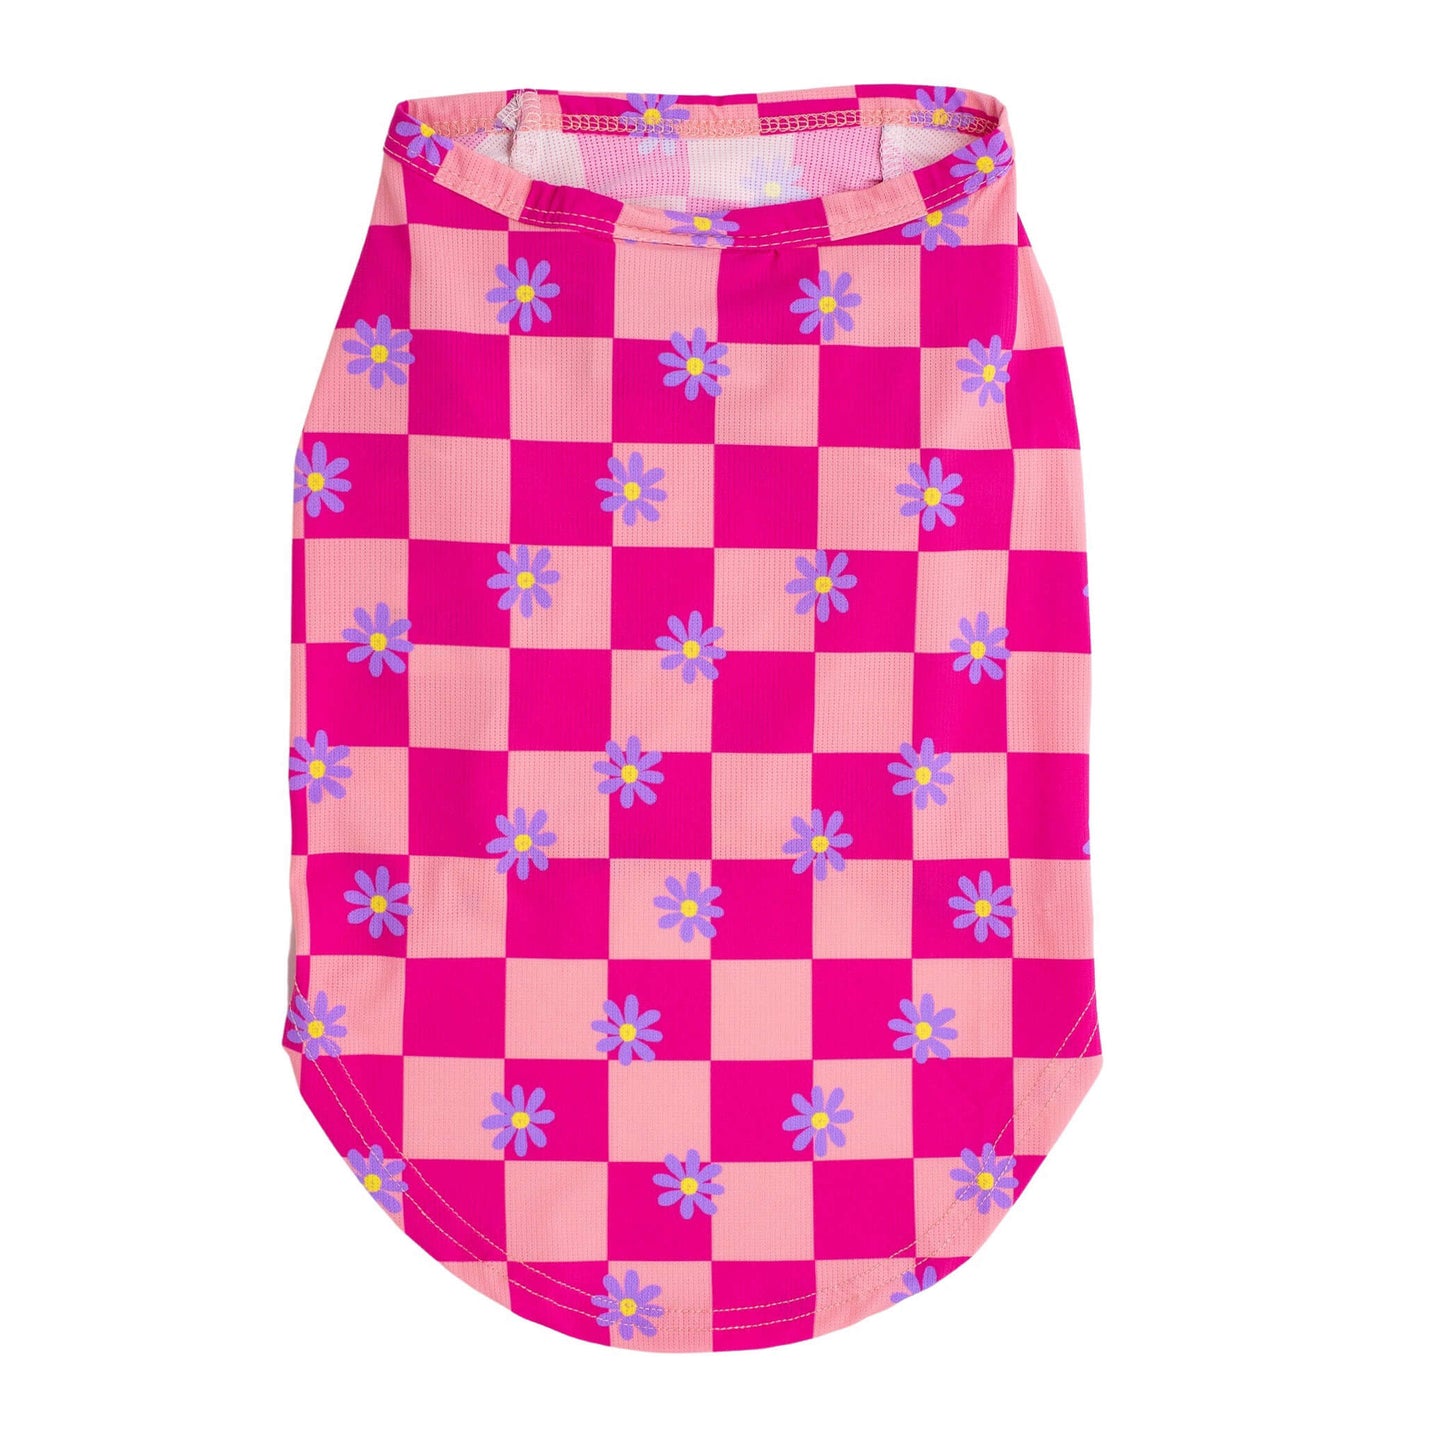 Back flat lay of Vibrant Hounds Crazy Daisy cooling shirt for dogs. It is pink chequered with daisys printed on it.